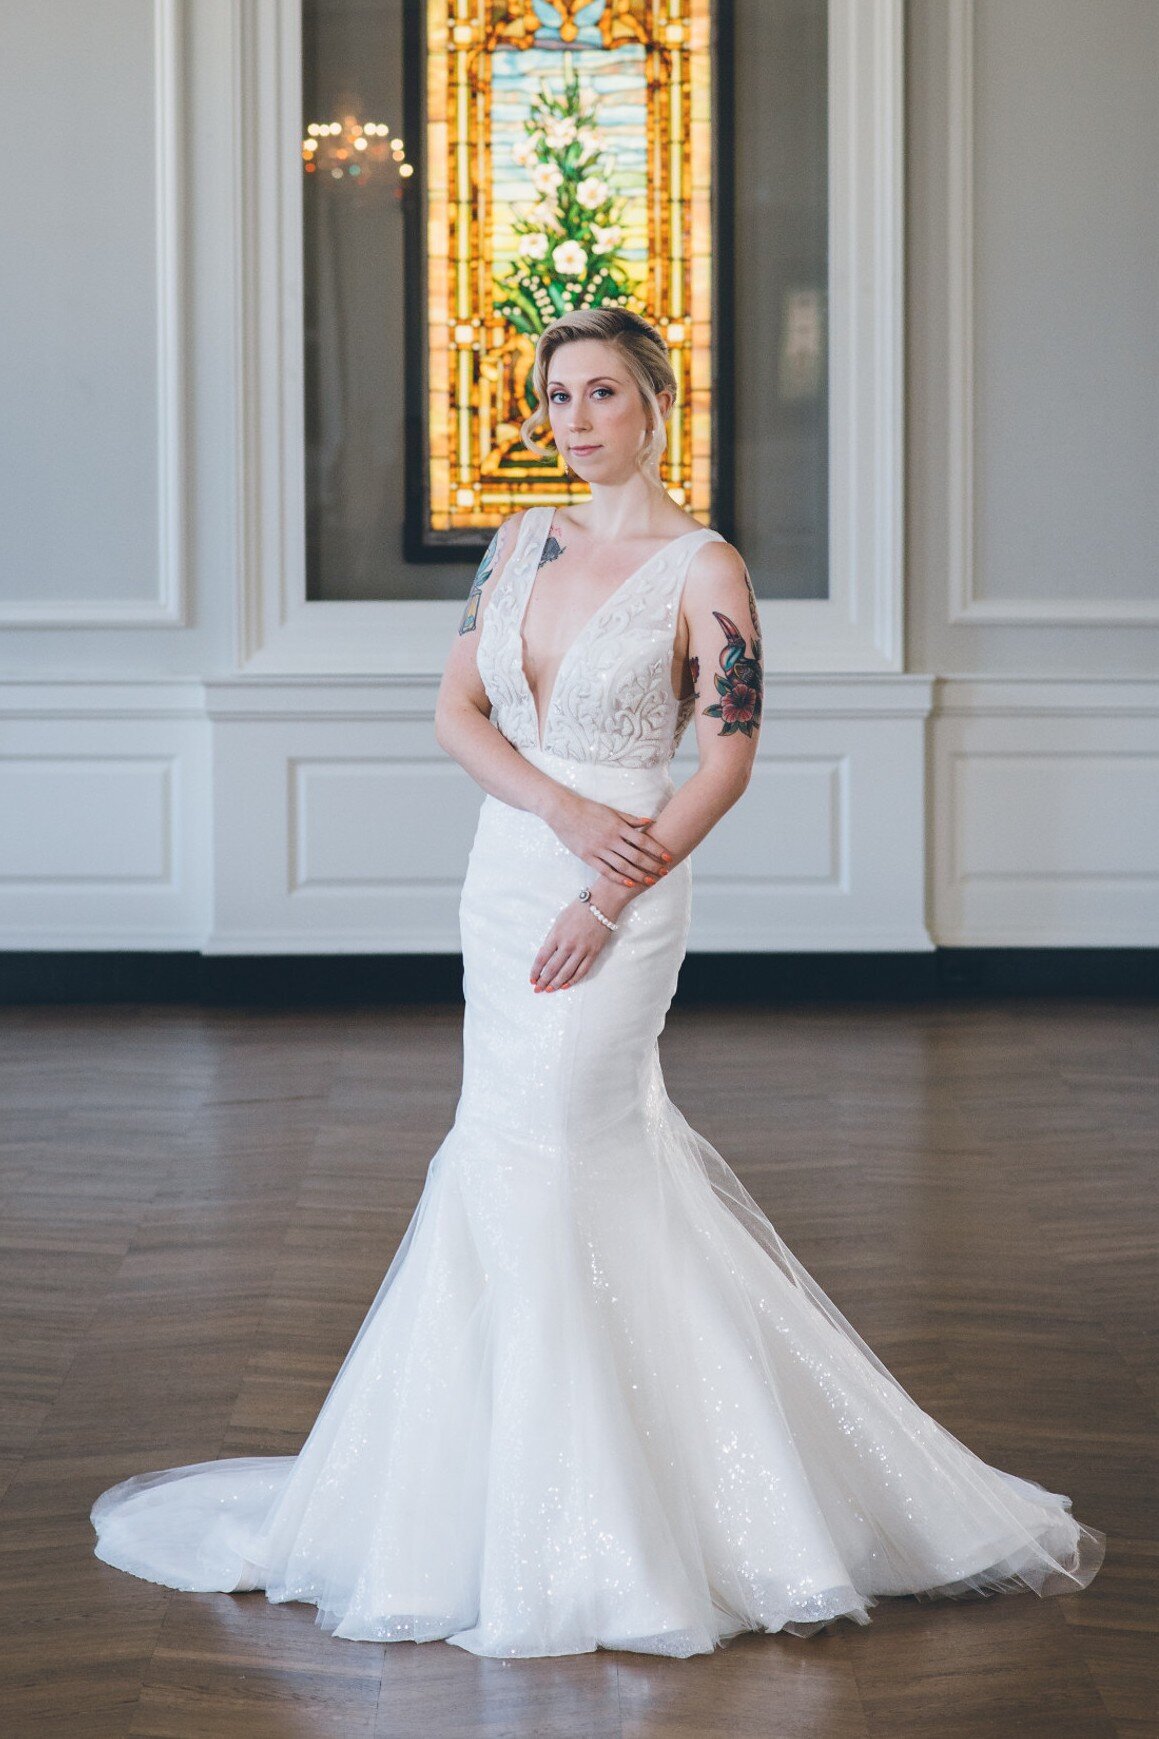 Faven is a plunging v-neck wedding dress style in a mermaid silhouette with a sparkling sequin skirt.